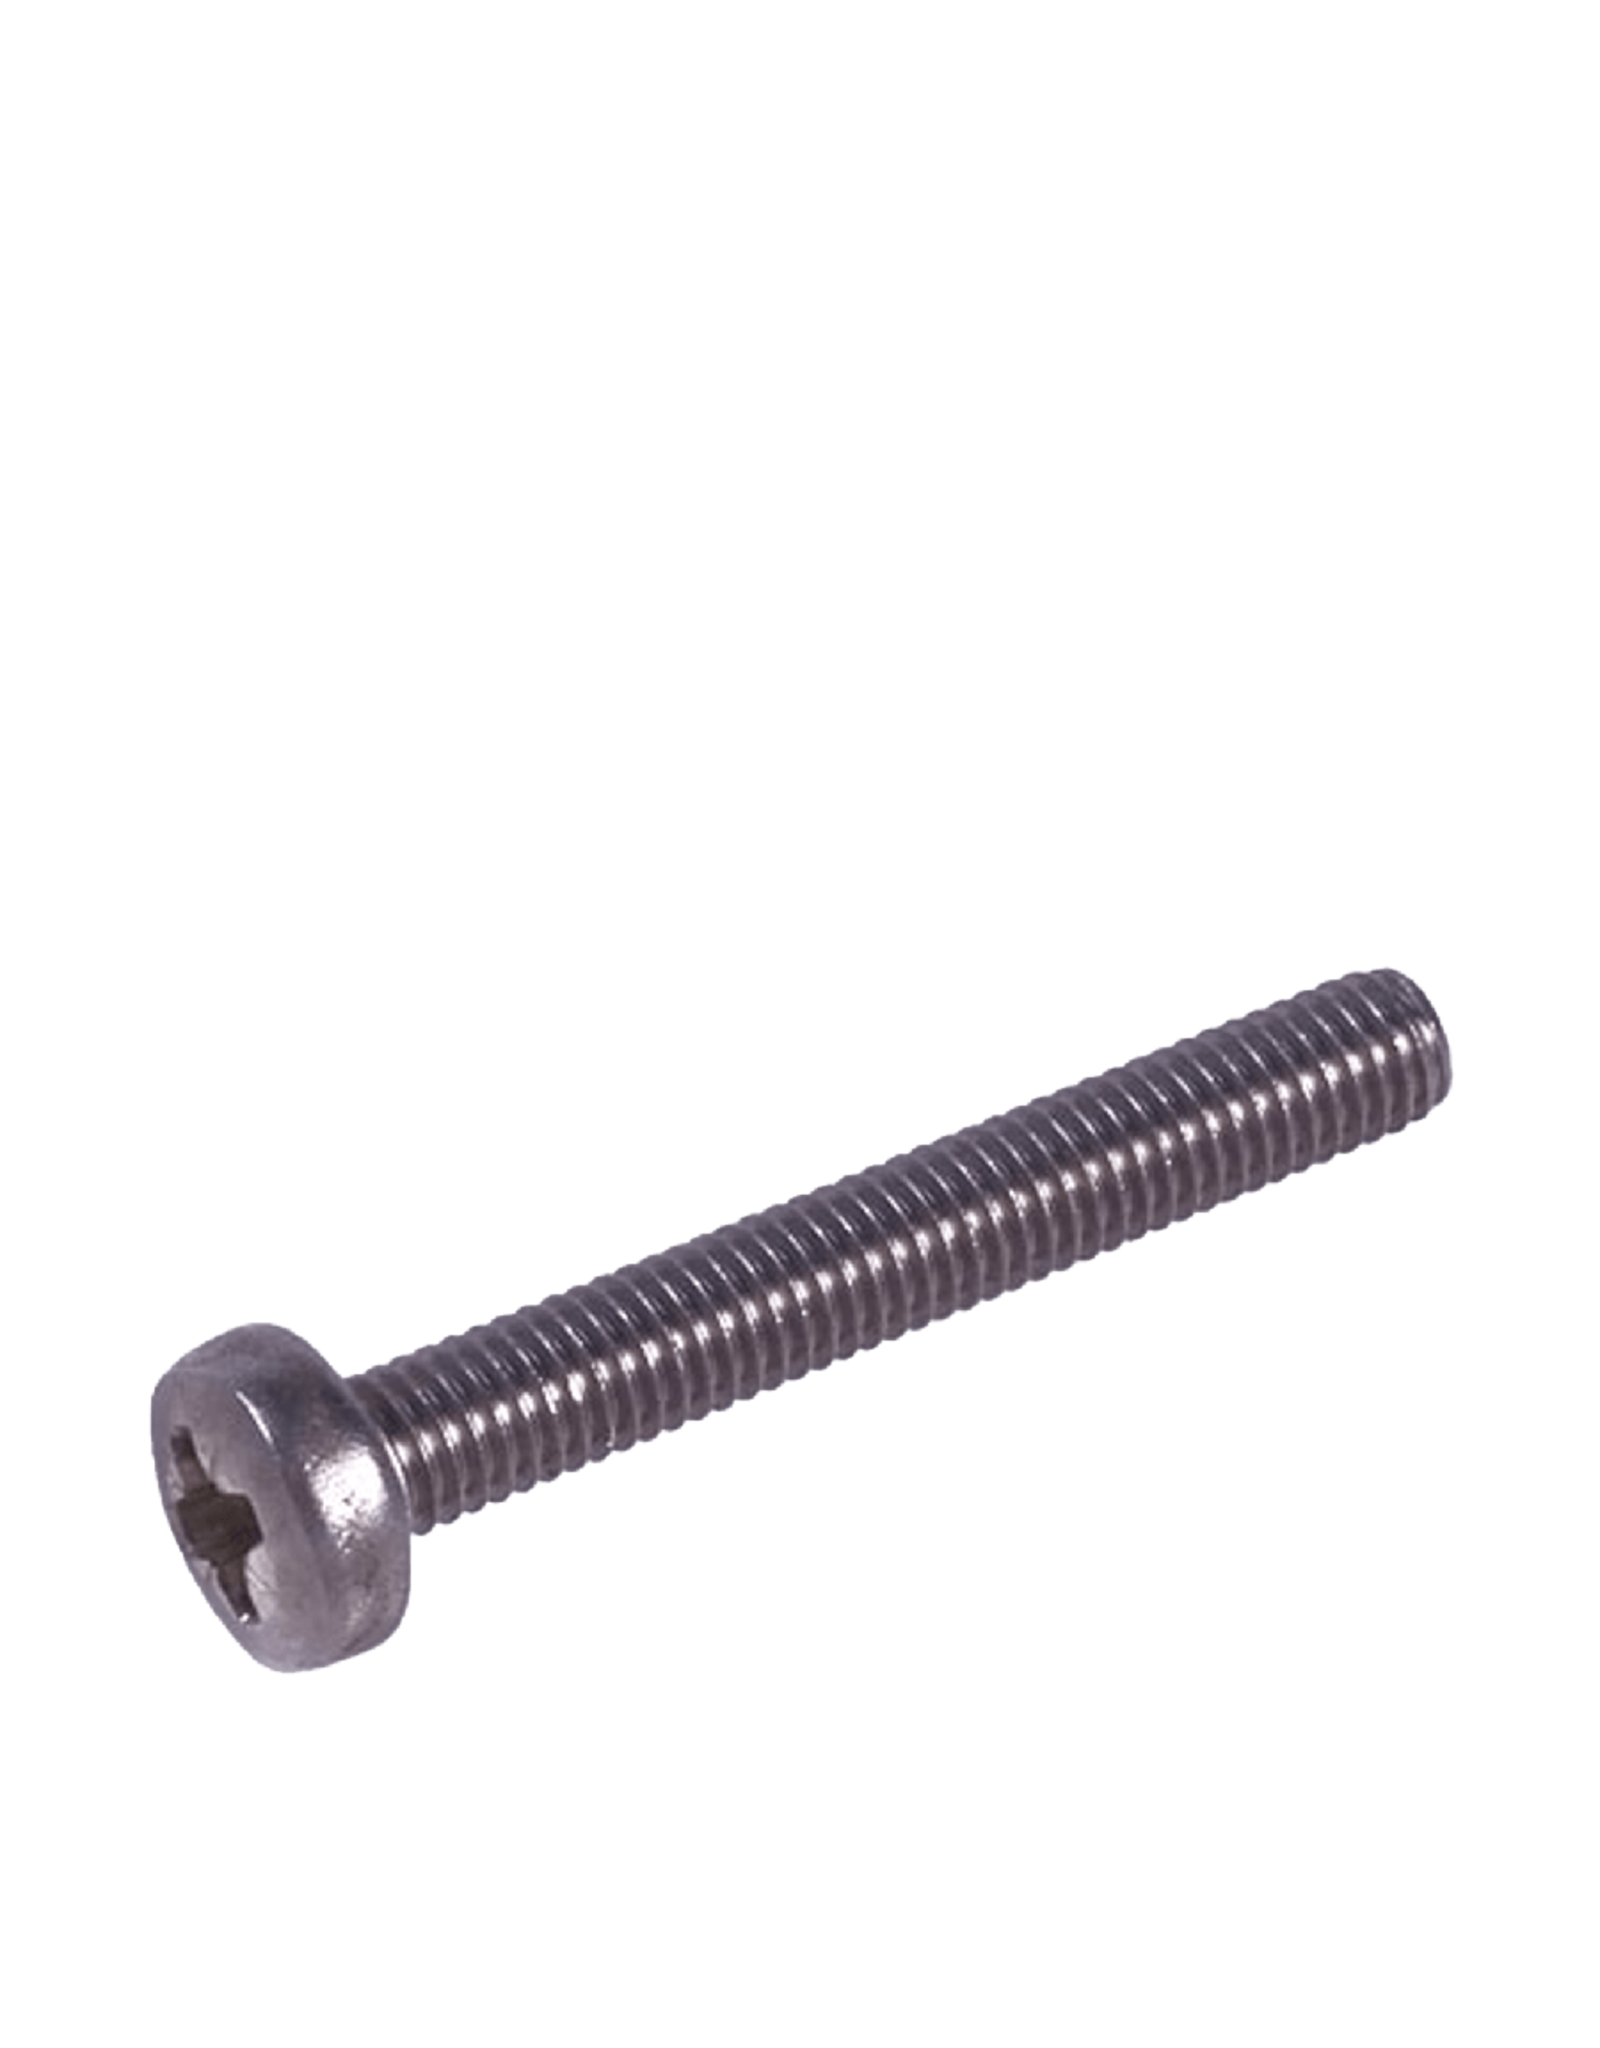 Tahe Marine Tahe Marine Acc. Front protection plate screws for Bilbao, Borneo and Tobago.